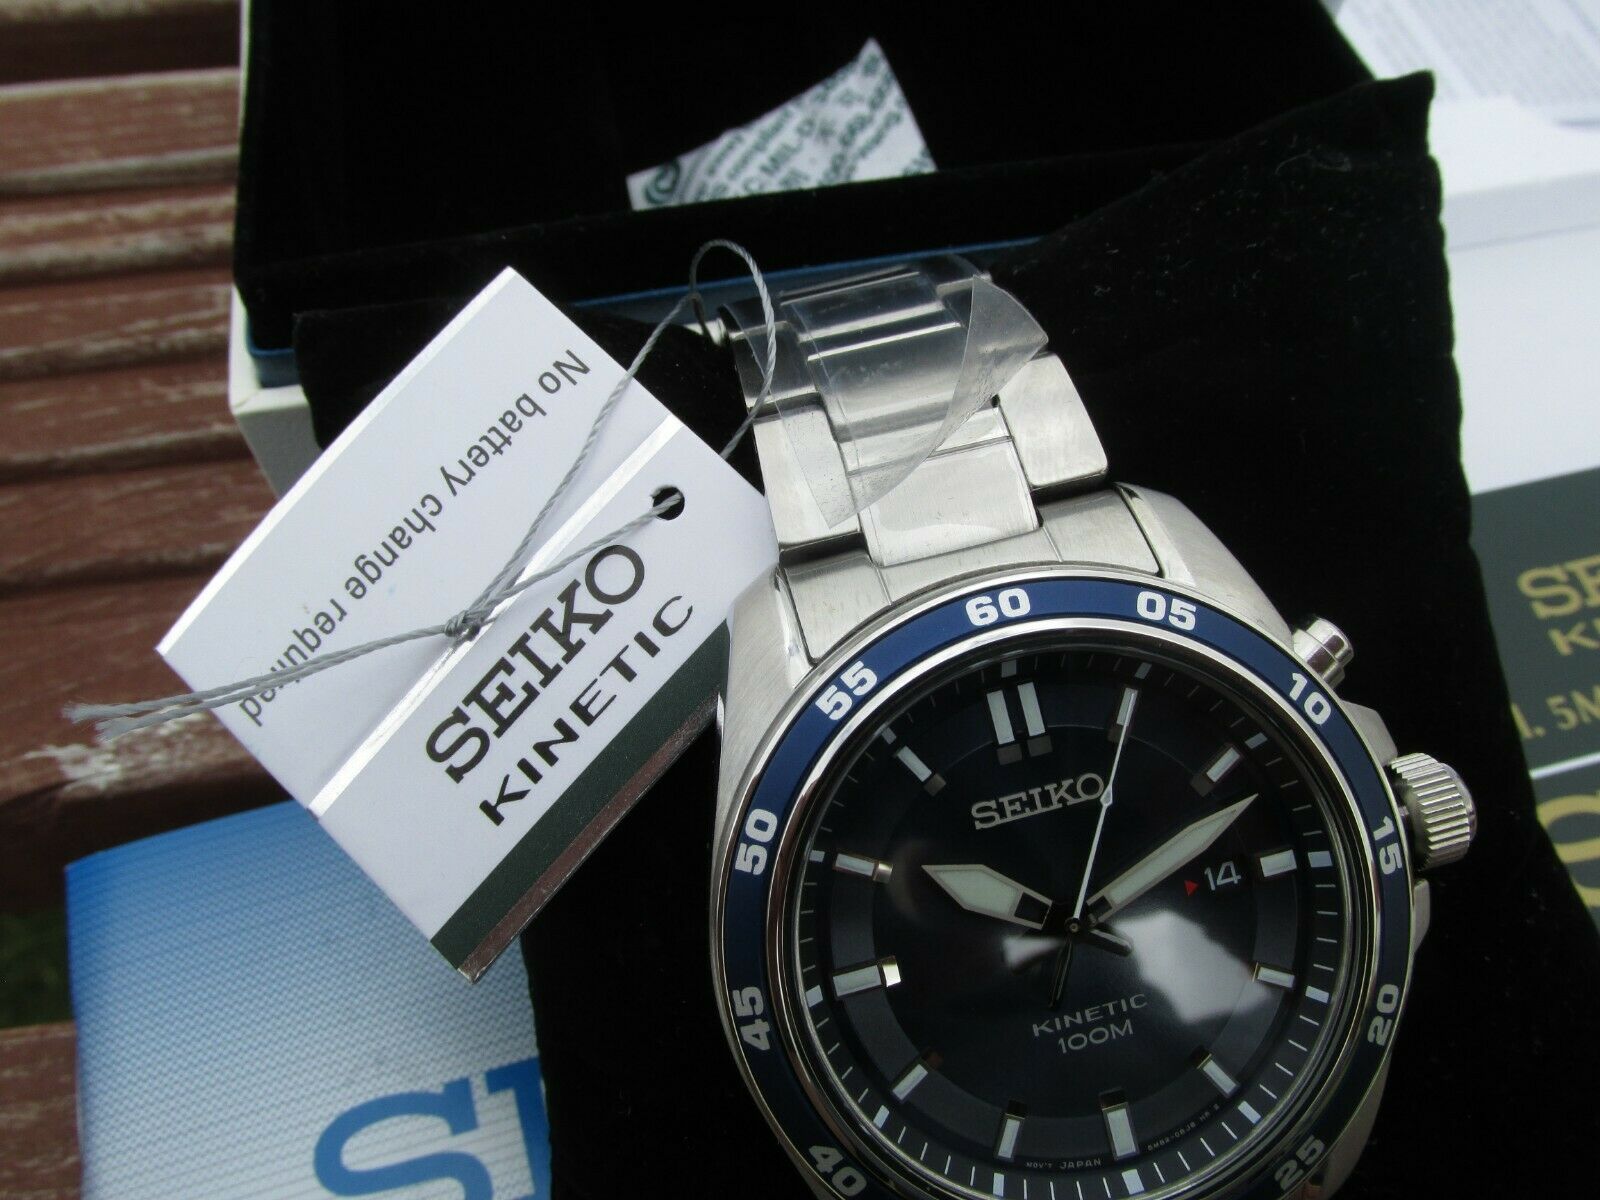 Superb SEIKO Kinetic SKA783P1 Blue dial watch Brand NEW all boxes and  booklets | WatchCharts